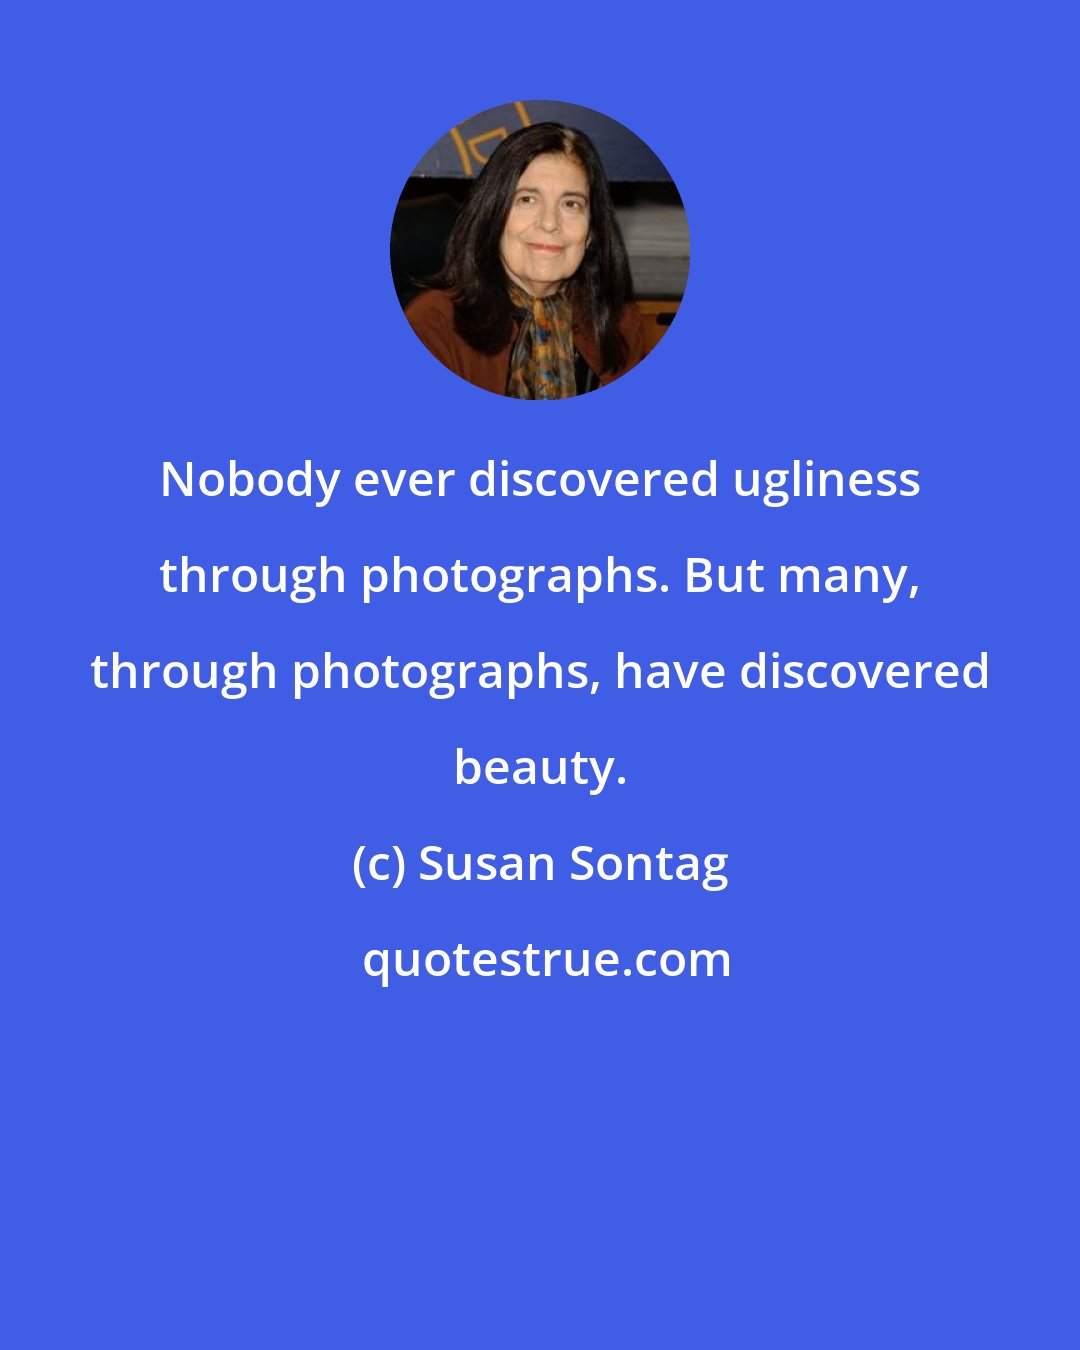 Susan Sontag: Nobody ever discovered ugliness through photographs. But many, through photographs, have discovered beauty.